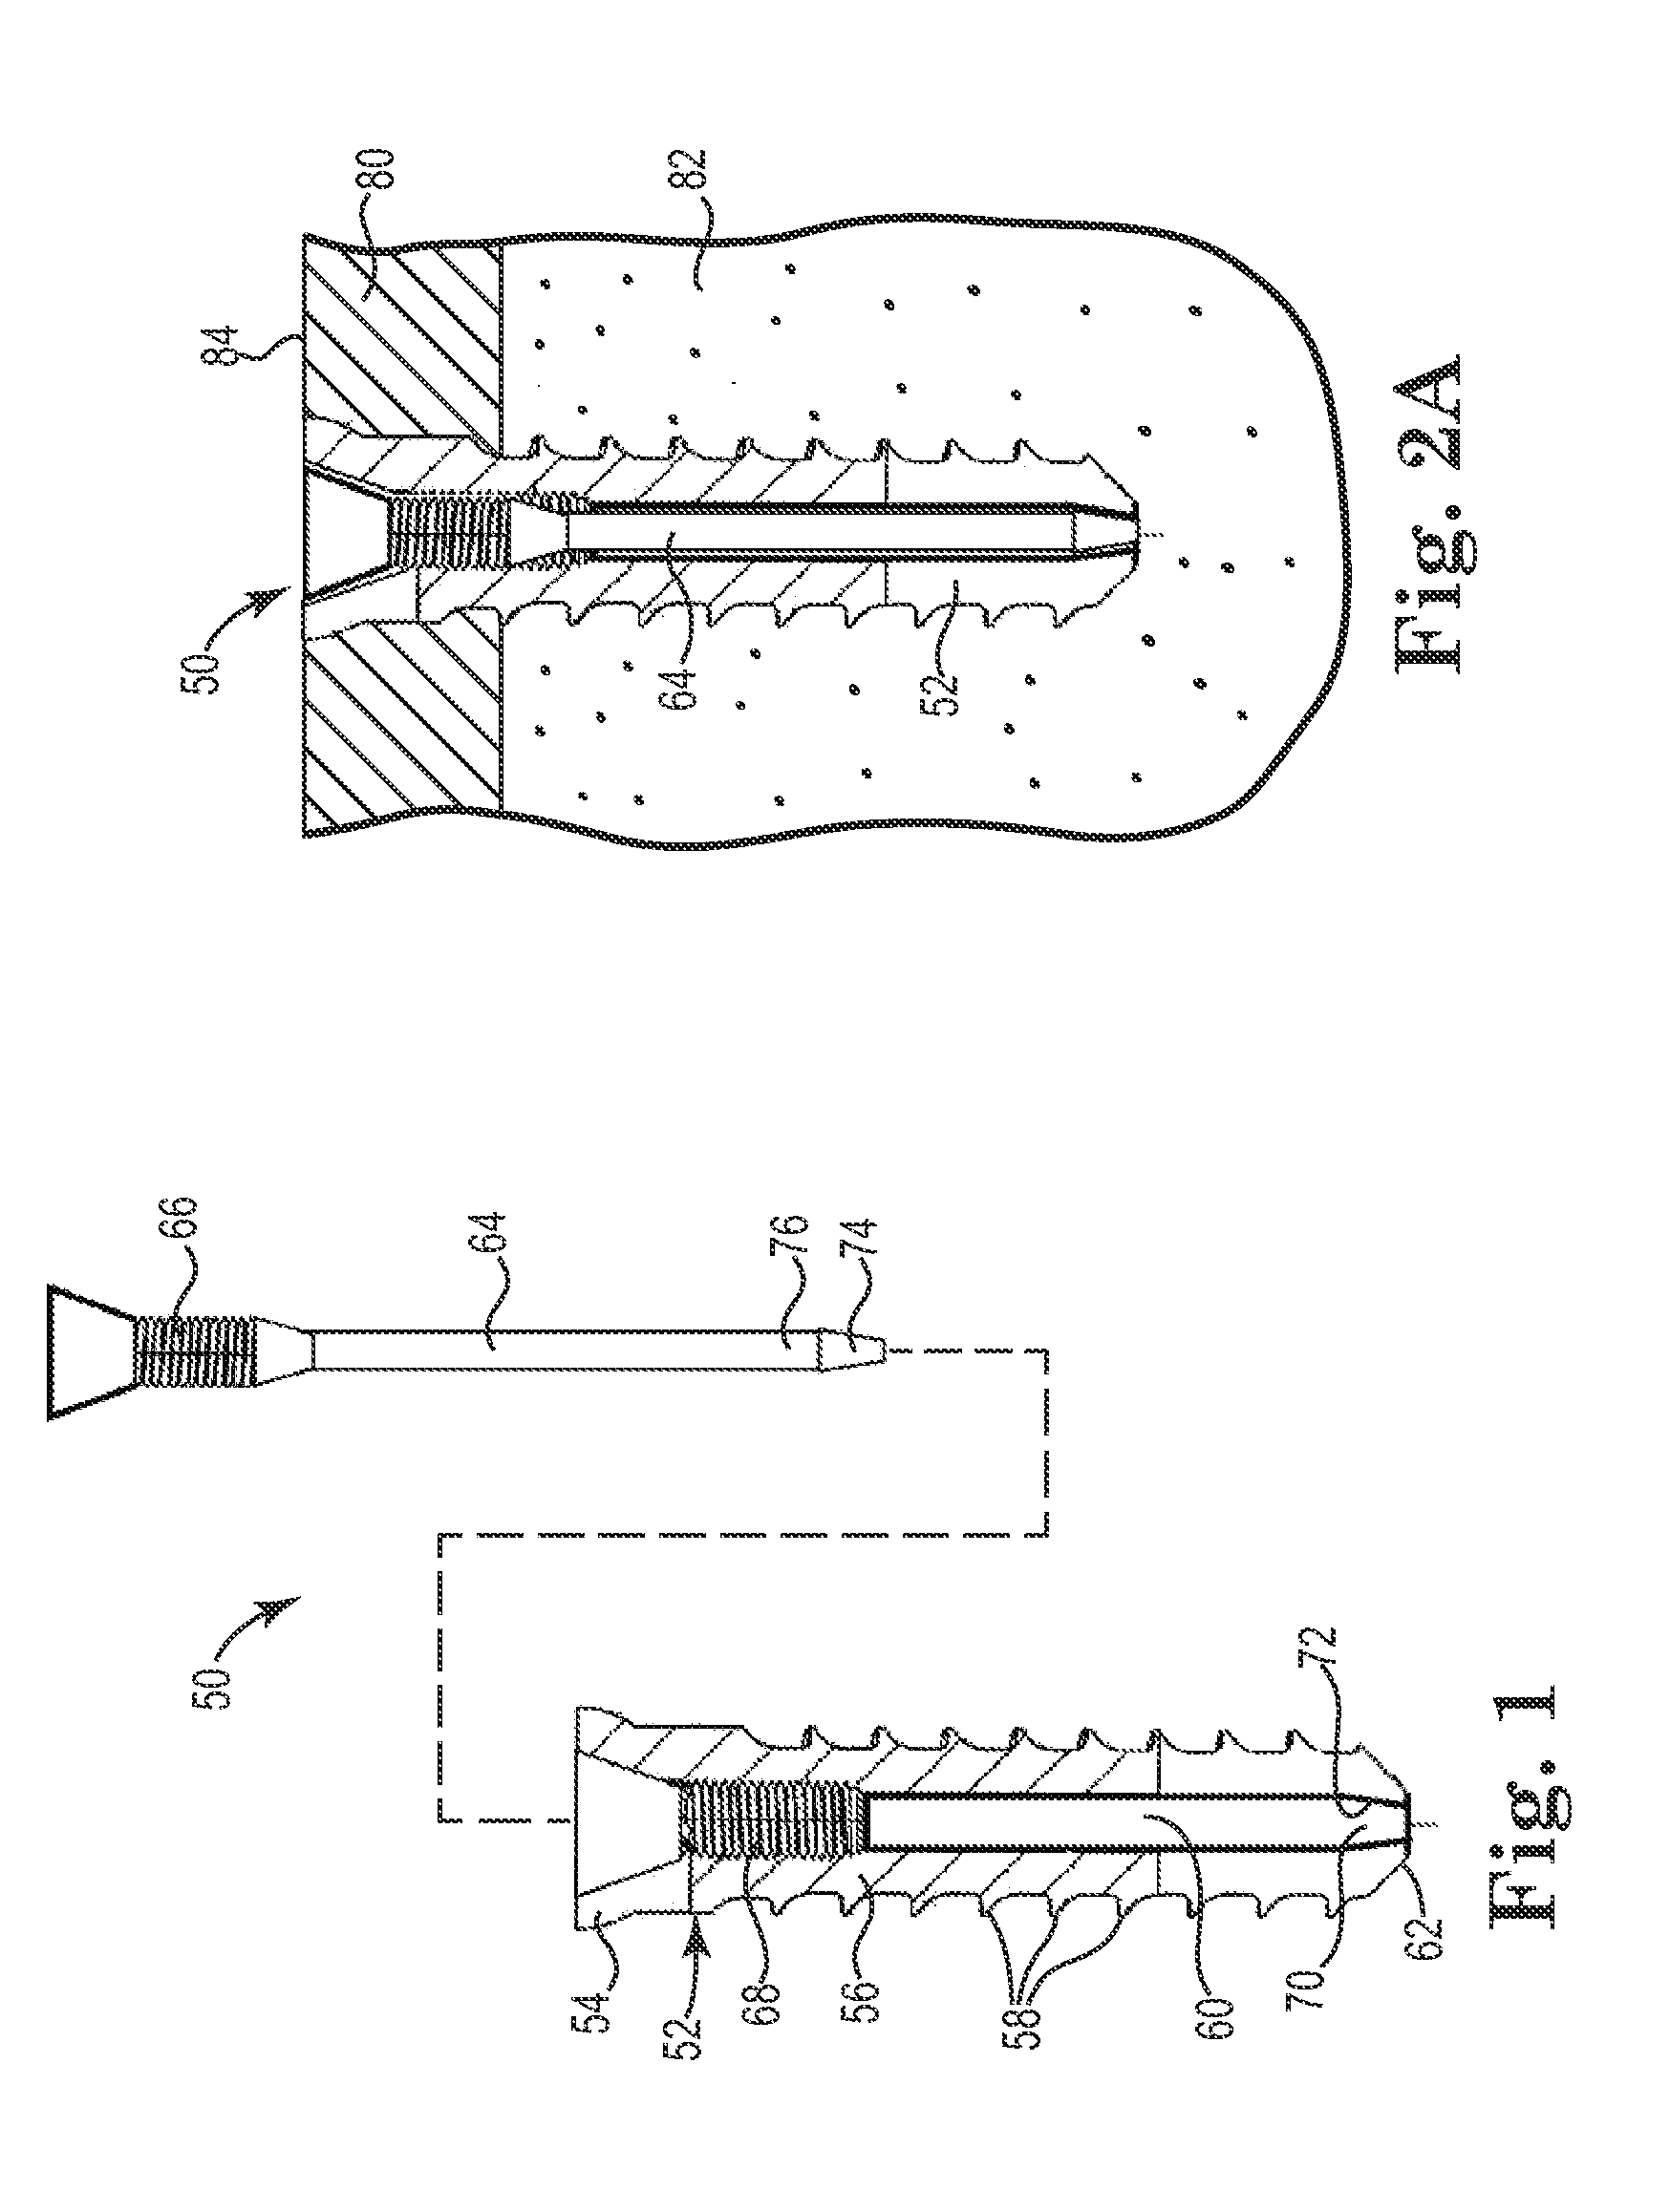 Fixation System for Orthopedic Devices